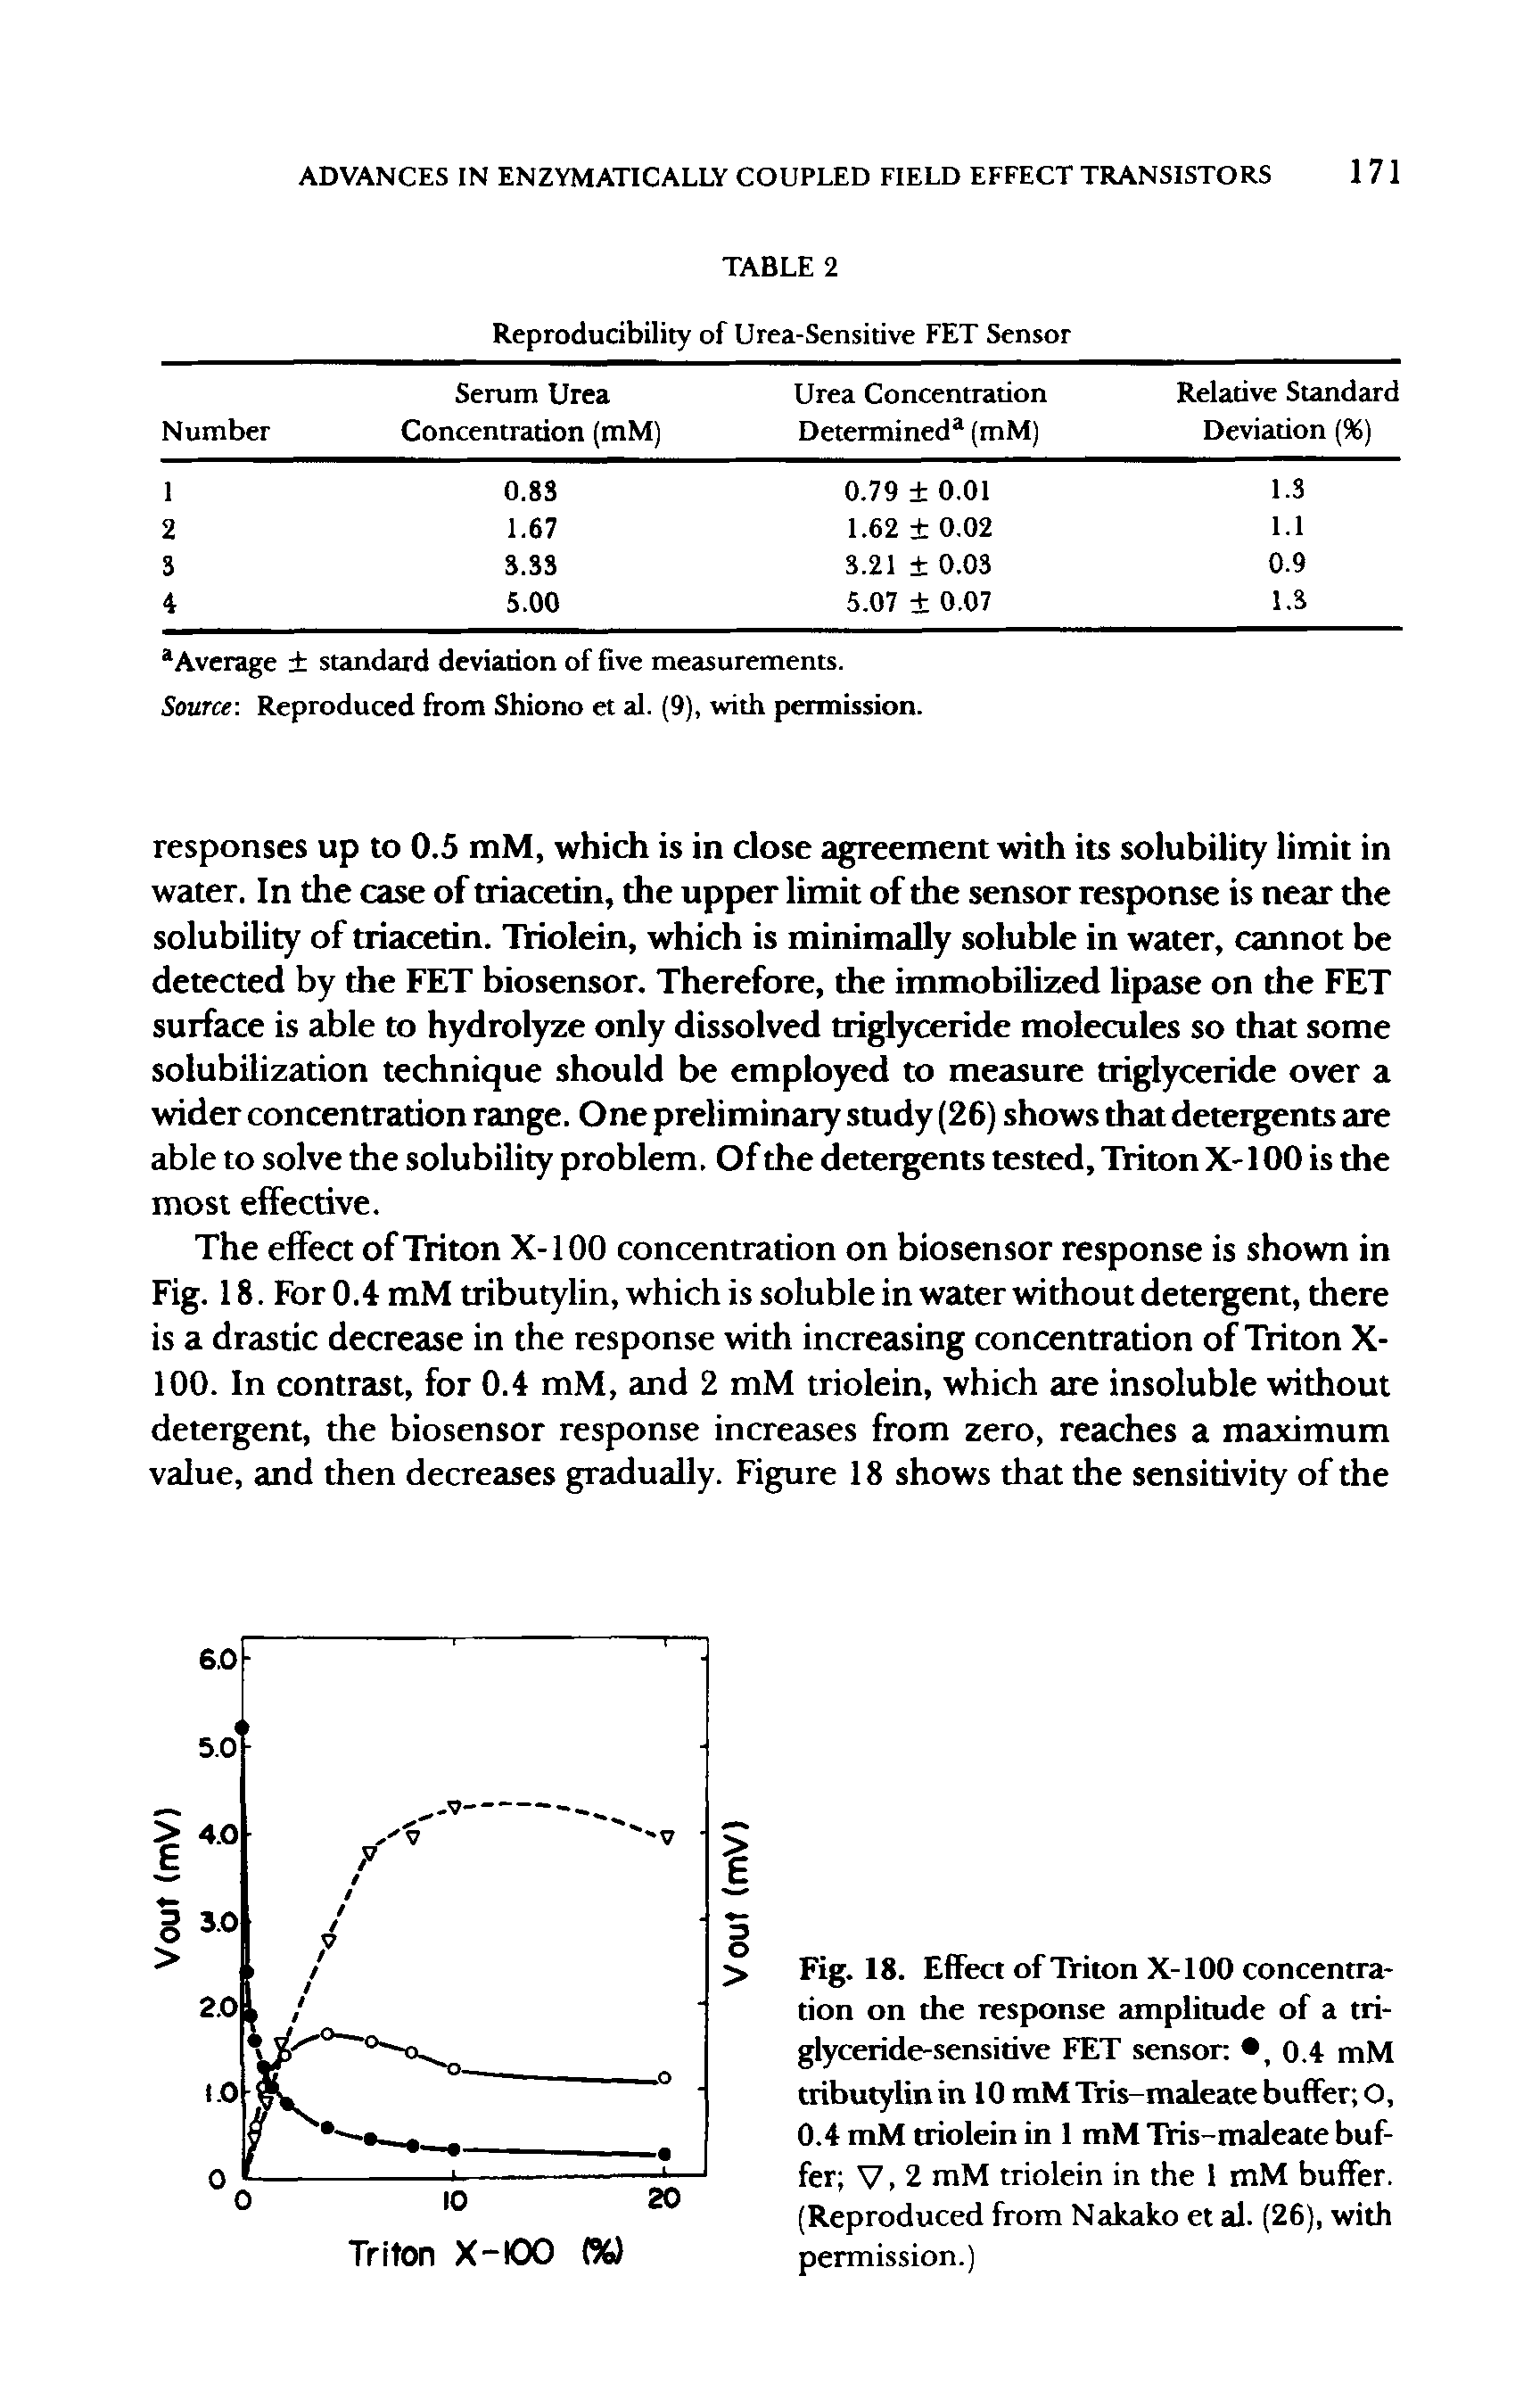 Fig. 18. Effect of Triton X-100 concentration on the response amplitude of a triglyceride-sensitive FET sensor , 0.4 mM tributylin in 10 mM Tris-maleate buffer O, 0.4 mM triolein in 1 mM Tris-maleate buffer V, 2 mM triolein in the 1 mM buffer. (Reproduced from Nakako et al. (26), with permission.)...